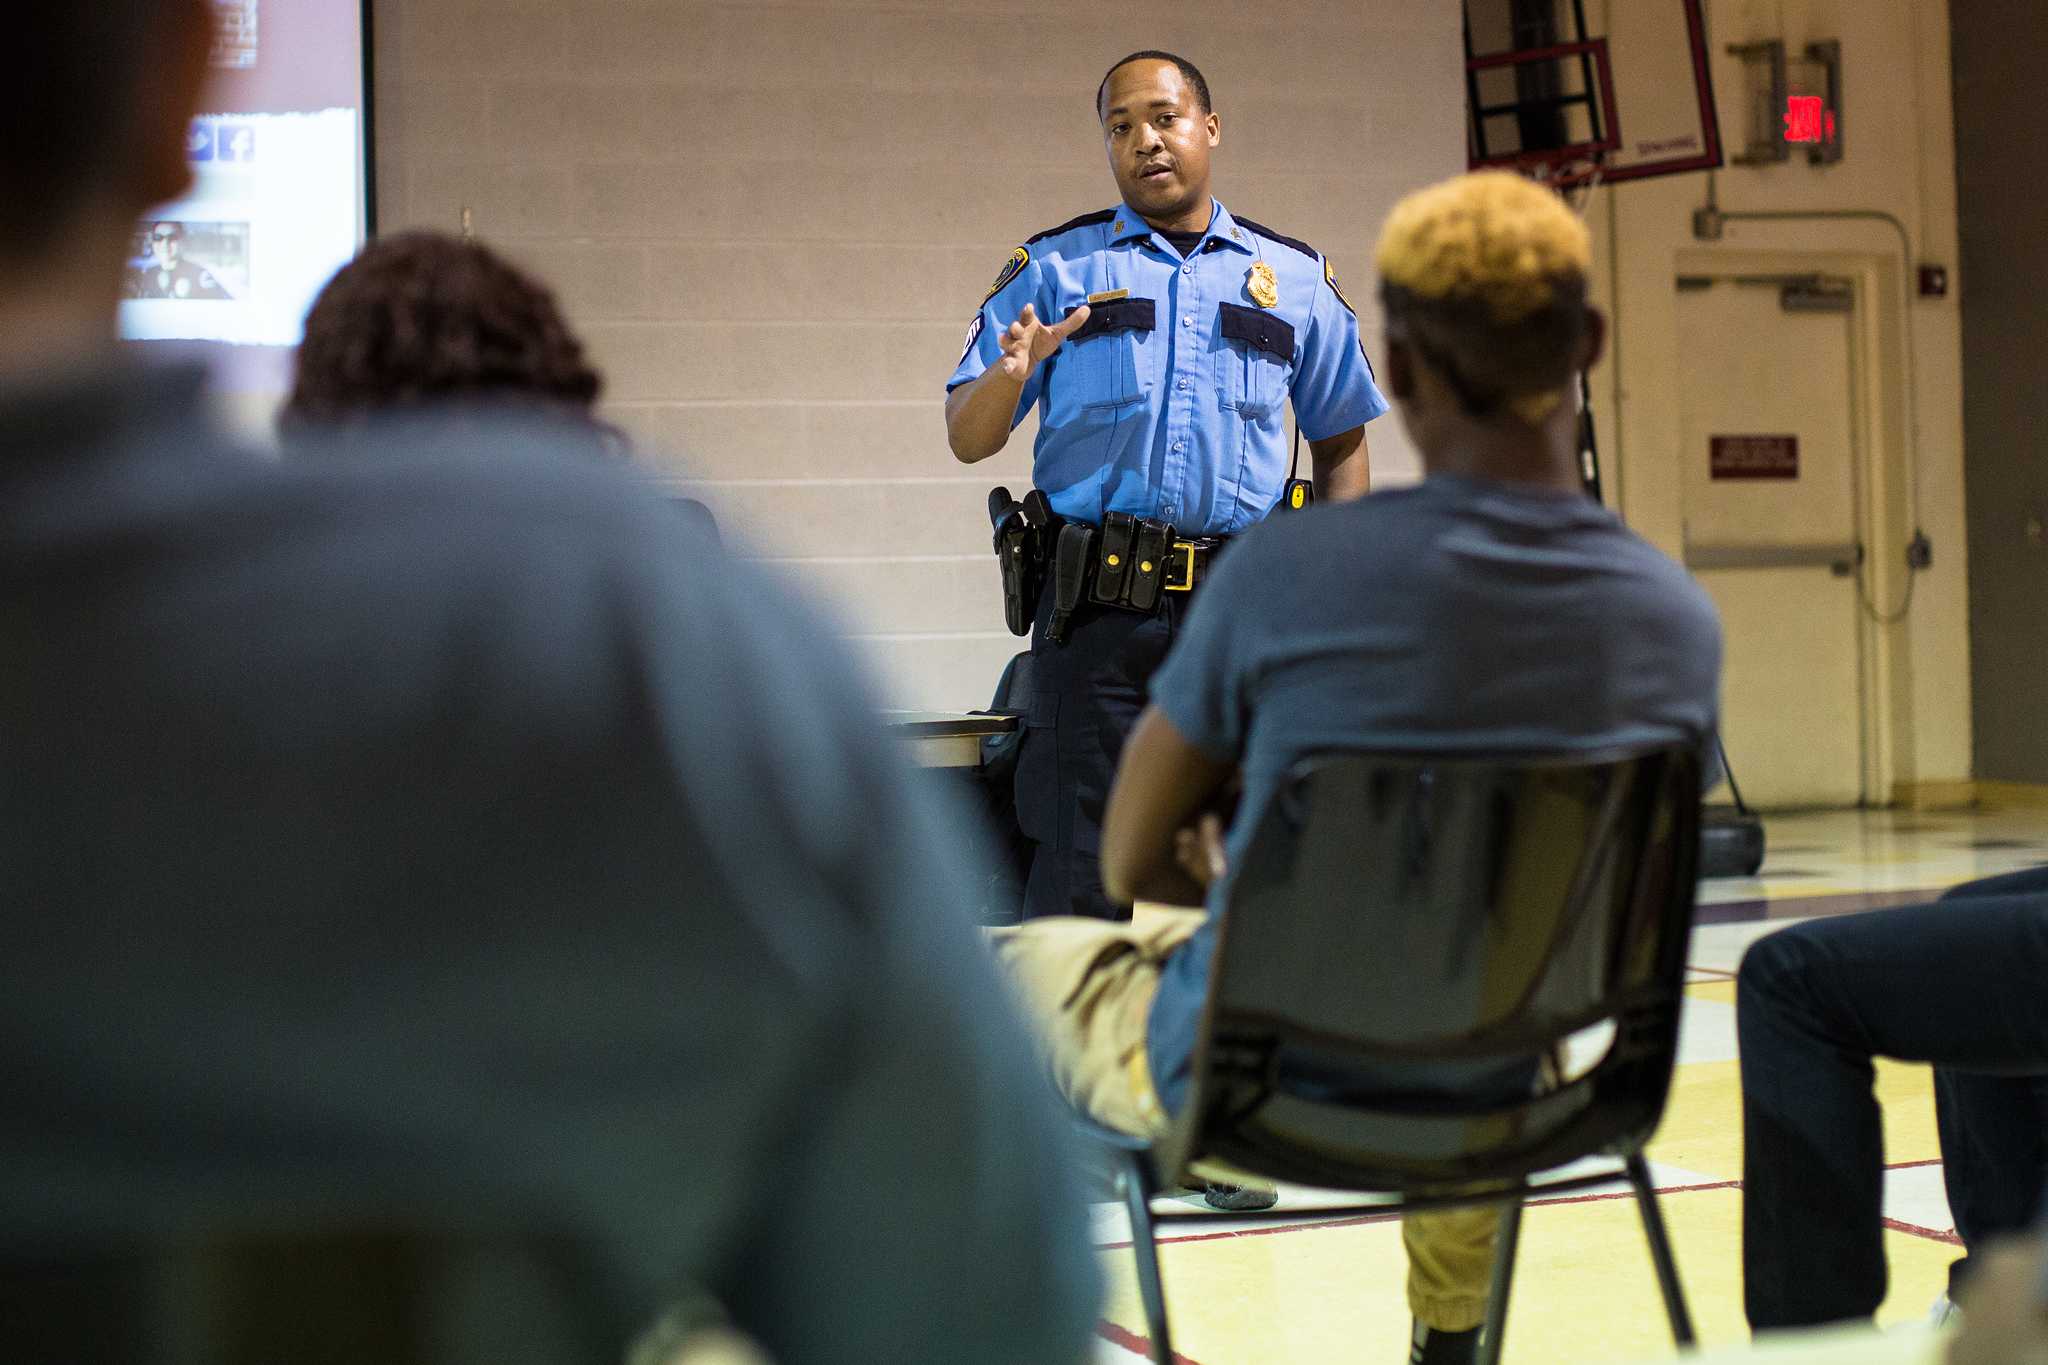 HPD Sergeant Anthony Turner talks to Beechnut Academy youth. Photo by The Signal reporter Travis Pennington.